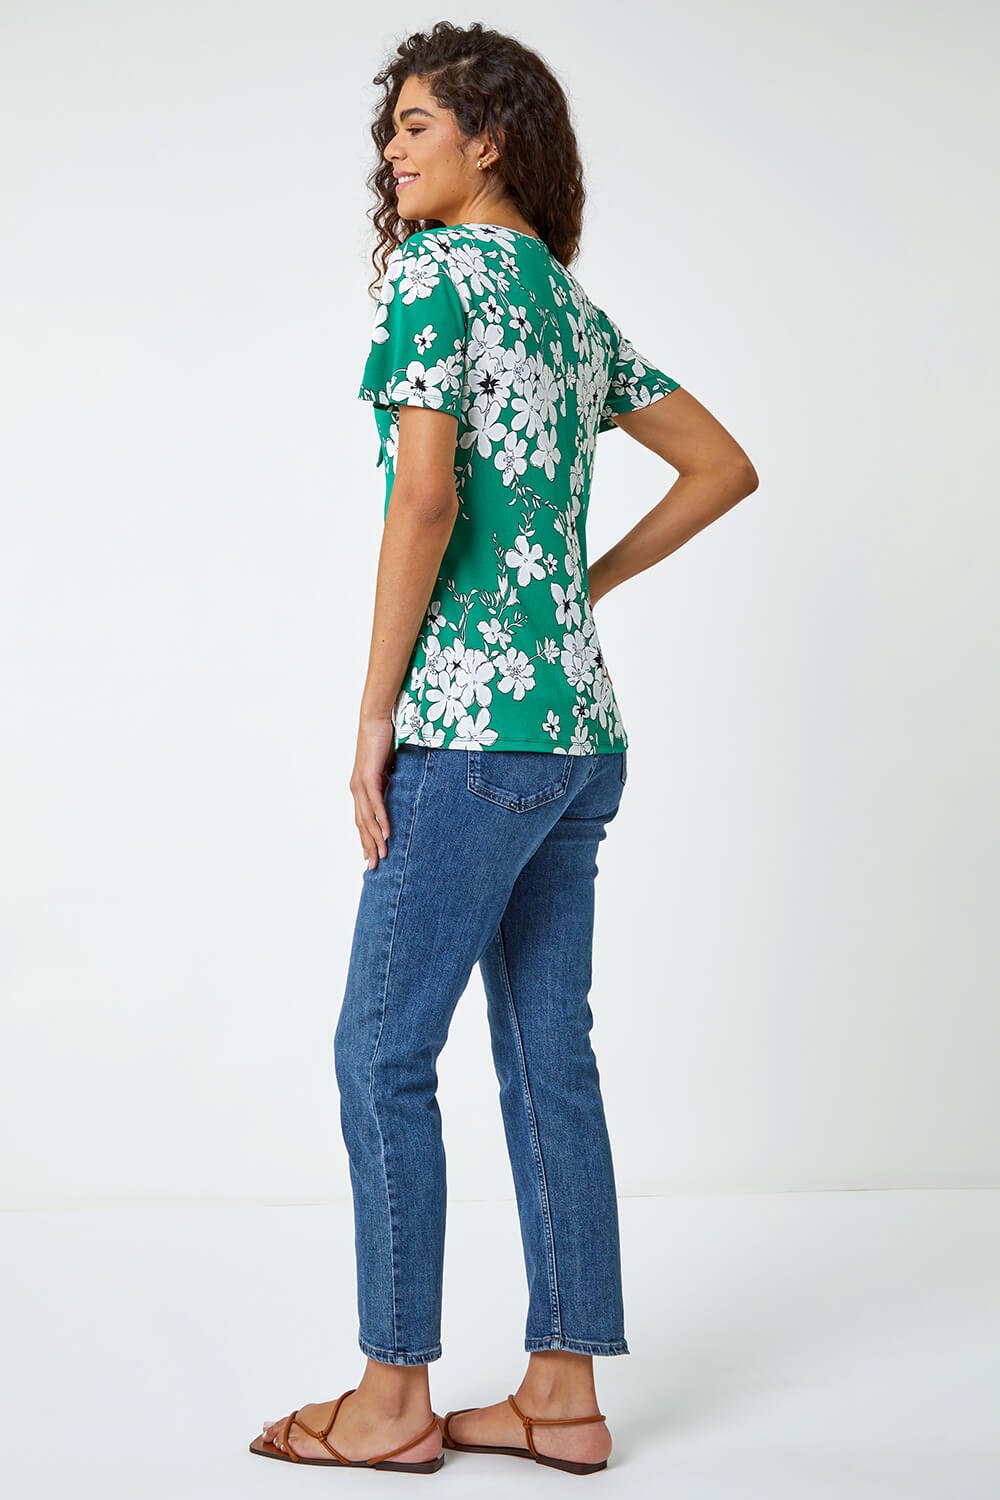 Green Textured Floral Print Ruched Top, Image 3 of 5